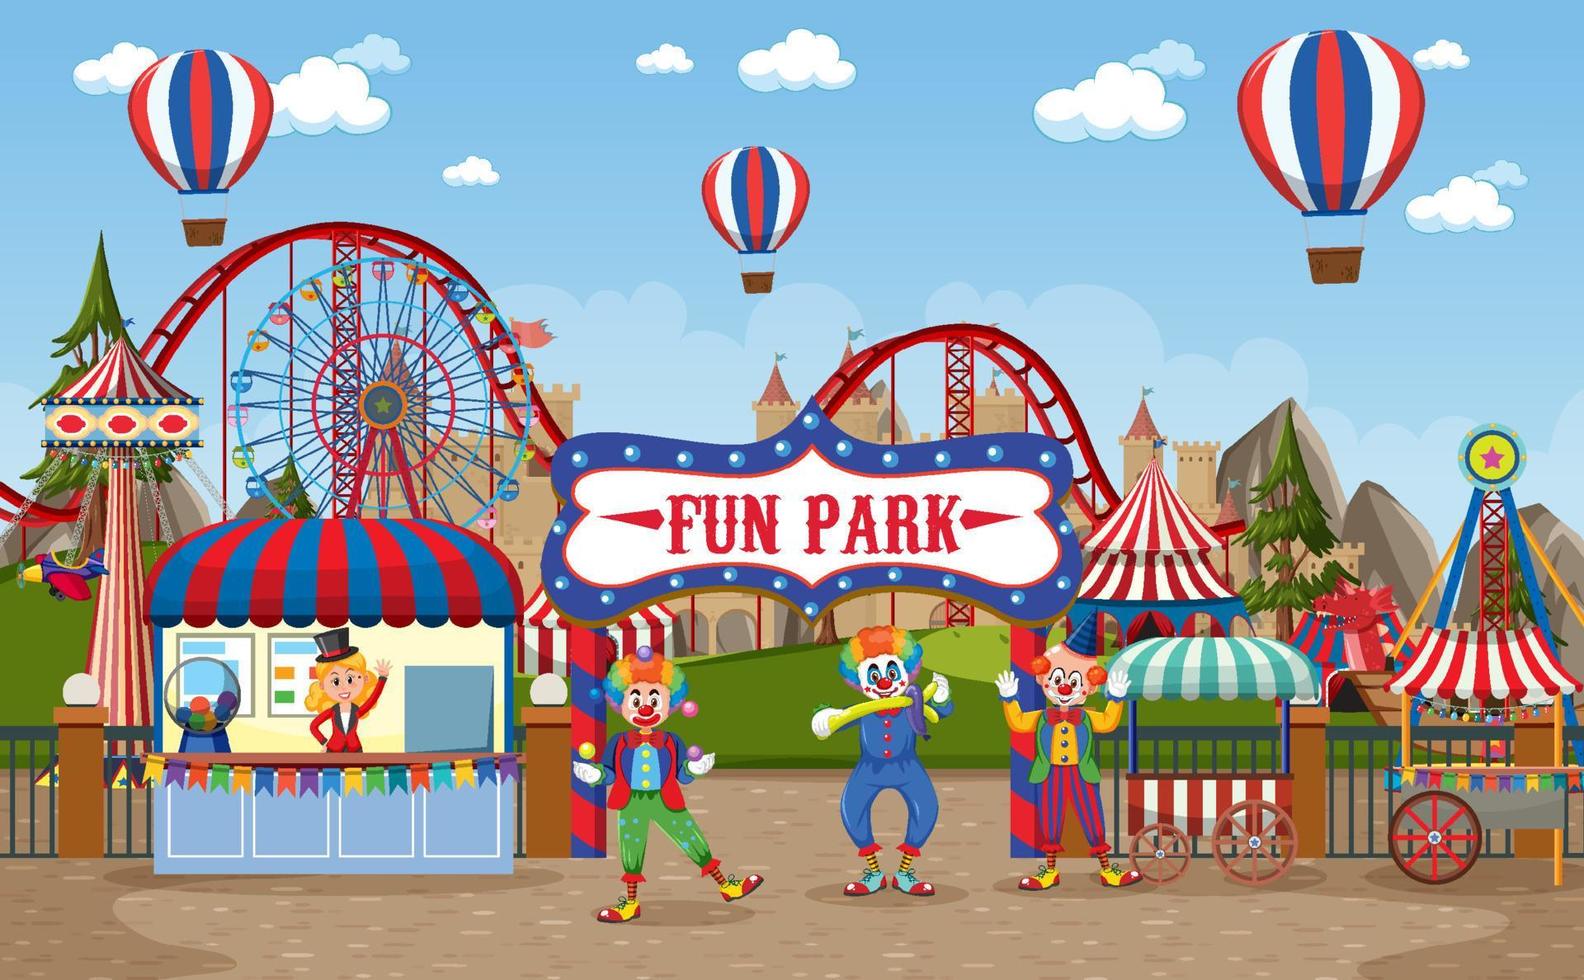 Amusement park scene with ferris wheel and circus dome vector